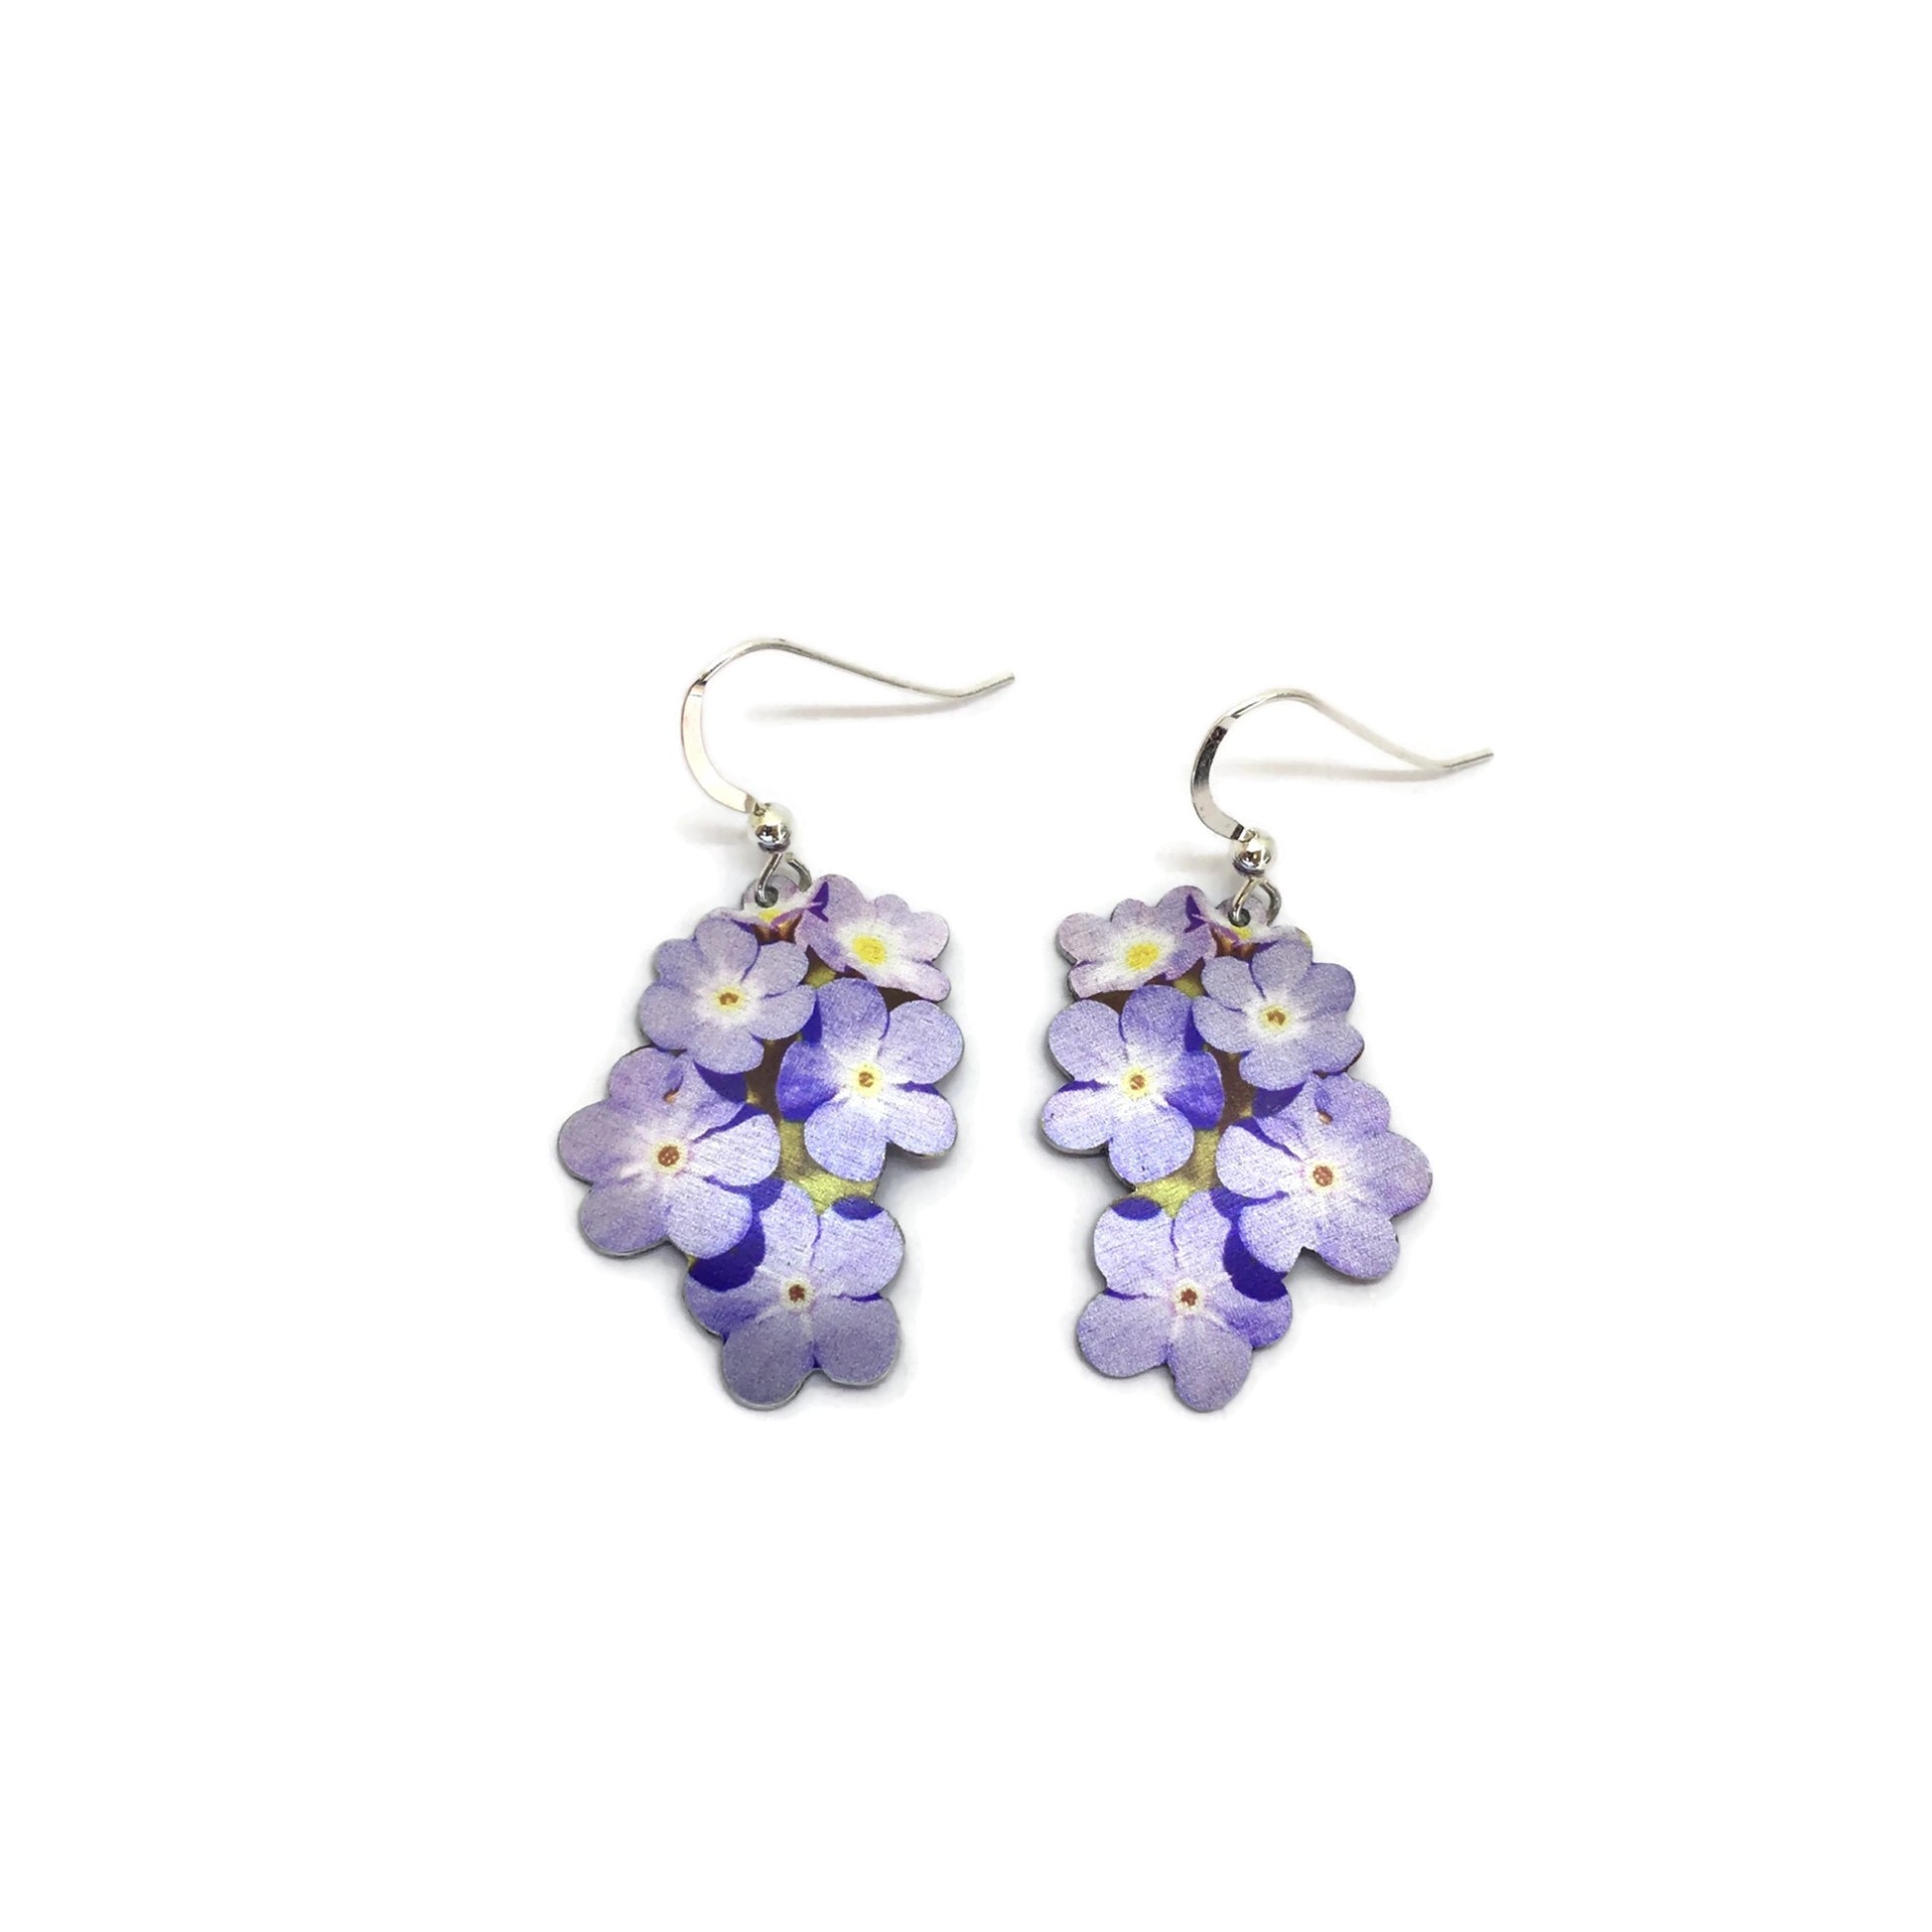 Forget me not flower earrings by Photofinish Jewellery